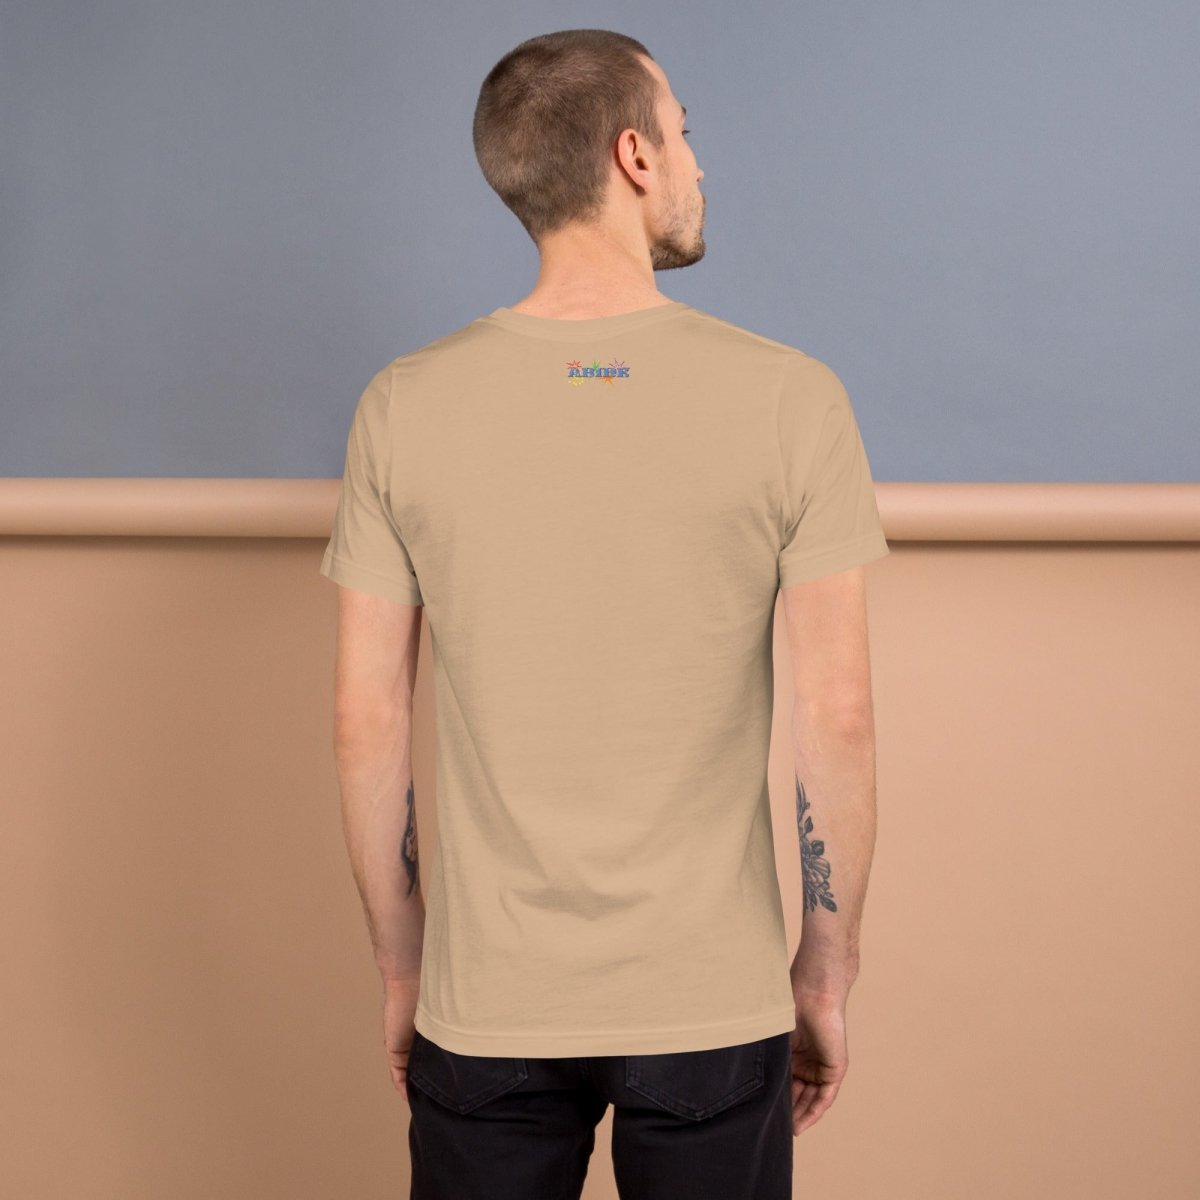 Dad Noises- Dadisms - Don't Make Me Pull This Car Over tan Unisex t-shirt back view - The Dude Abides - Birthday